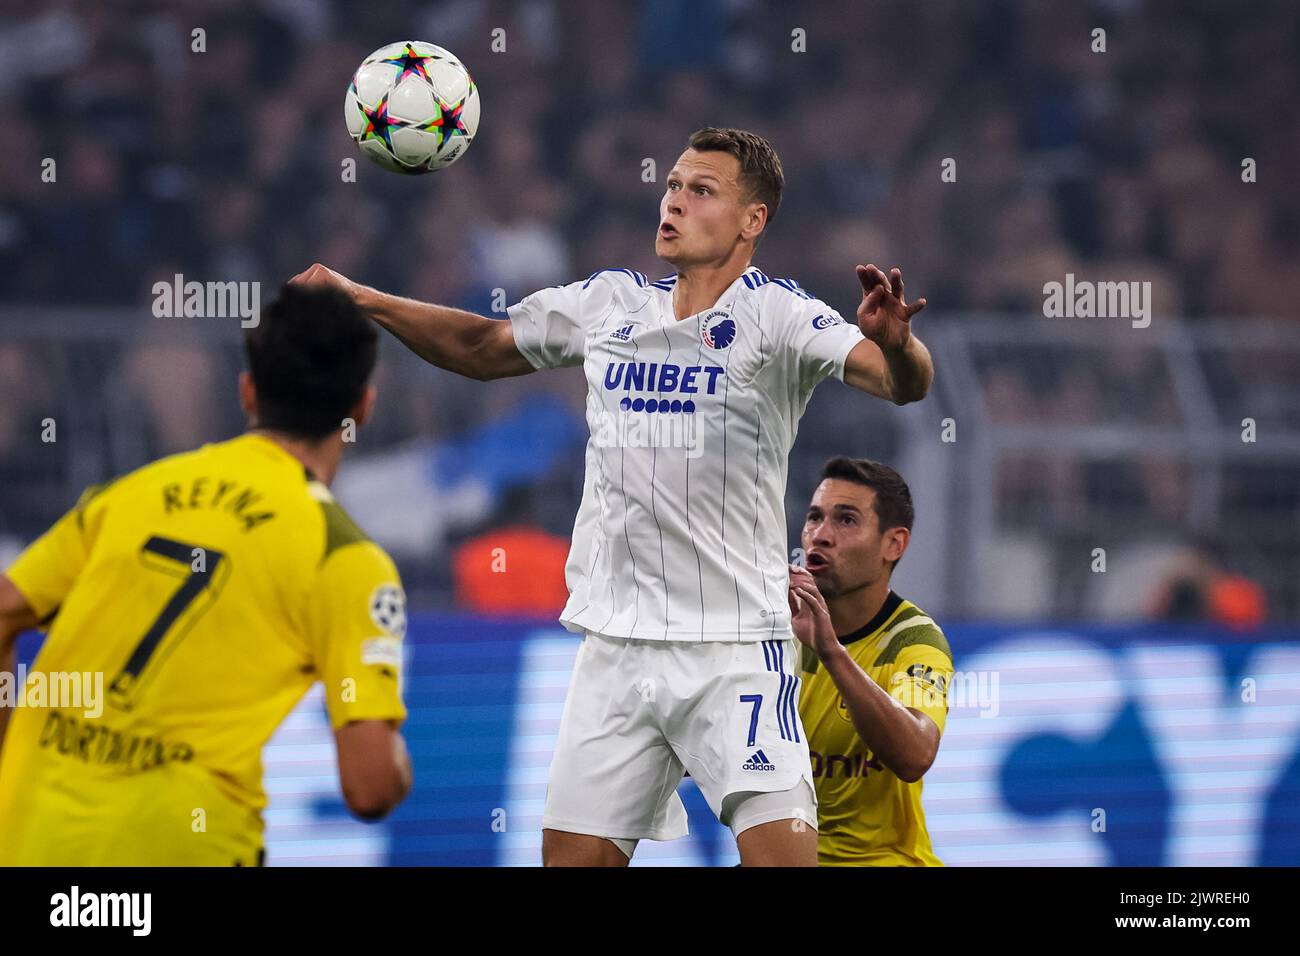 Dortmund, Germany. 06th Sep, 2022. DORTMUND, GERMANY - SEPTEMBER 6: Viktor Claesson of FC Copenhagen controls the ball during the UEFA Champions League Group G match between Borussia Dortmund and FC Copenhagen at the Signal Iduna Park on September 6, 2022 in Dortmund, Germany (Photo by Marcel ter Bals/Orange Pictures) Credit: Orange Pics BV/Alamy Live News Stock Photo